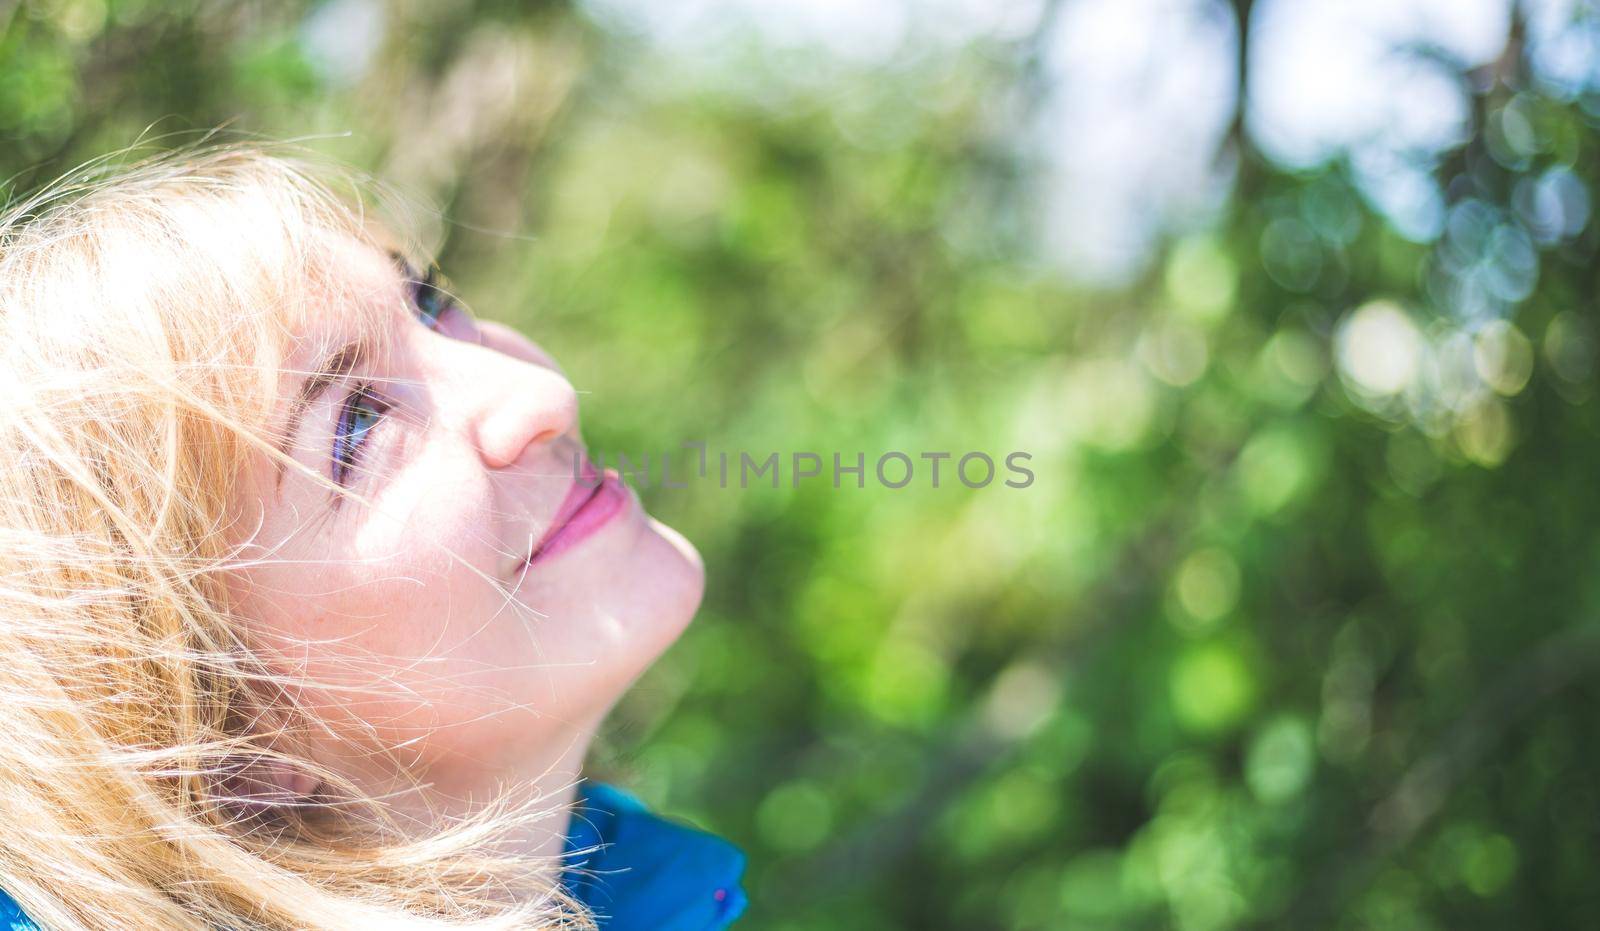 Smiling outdoors in spring. Portrait of smiling blonde girl outdoors by Daxenbichler